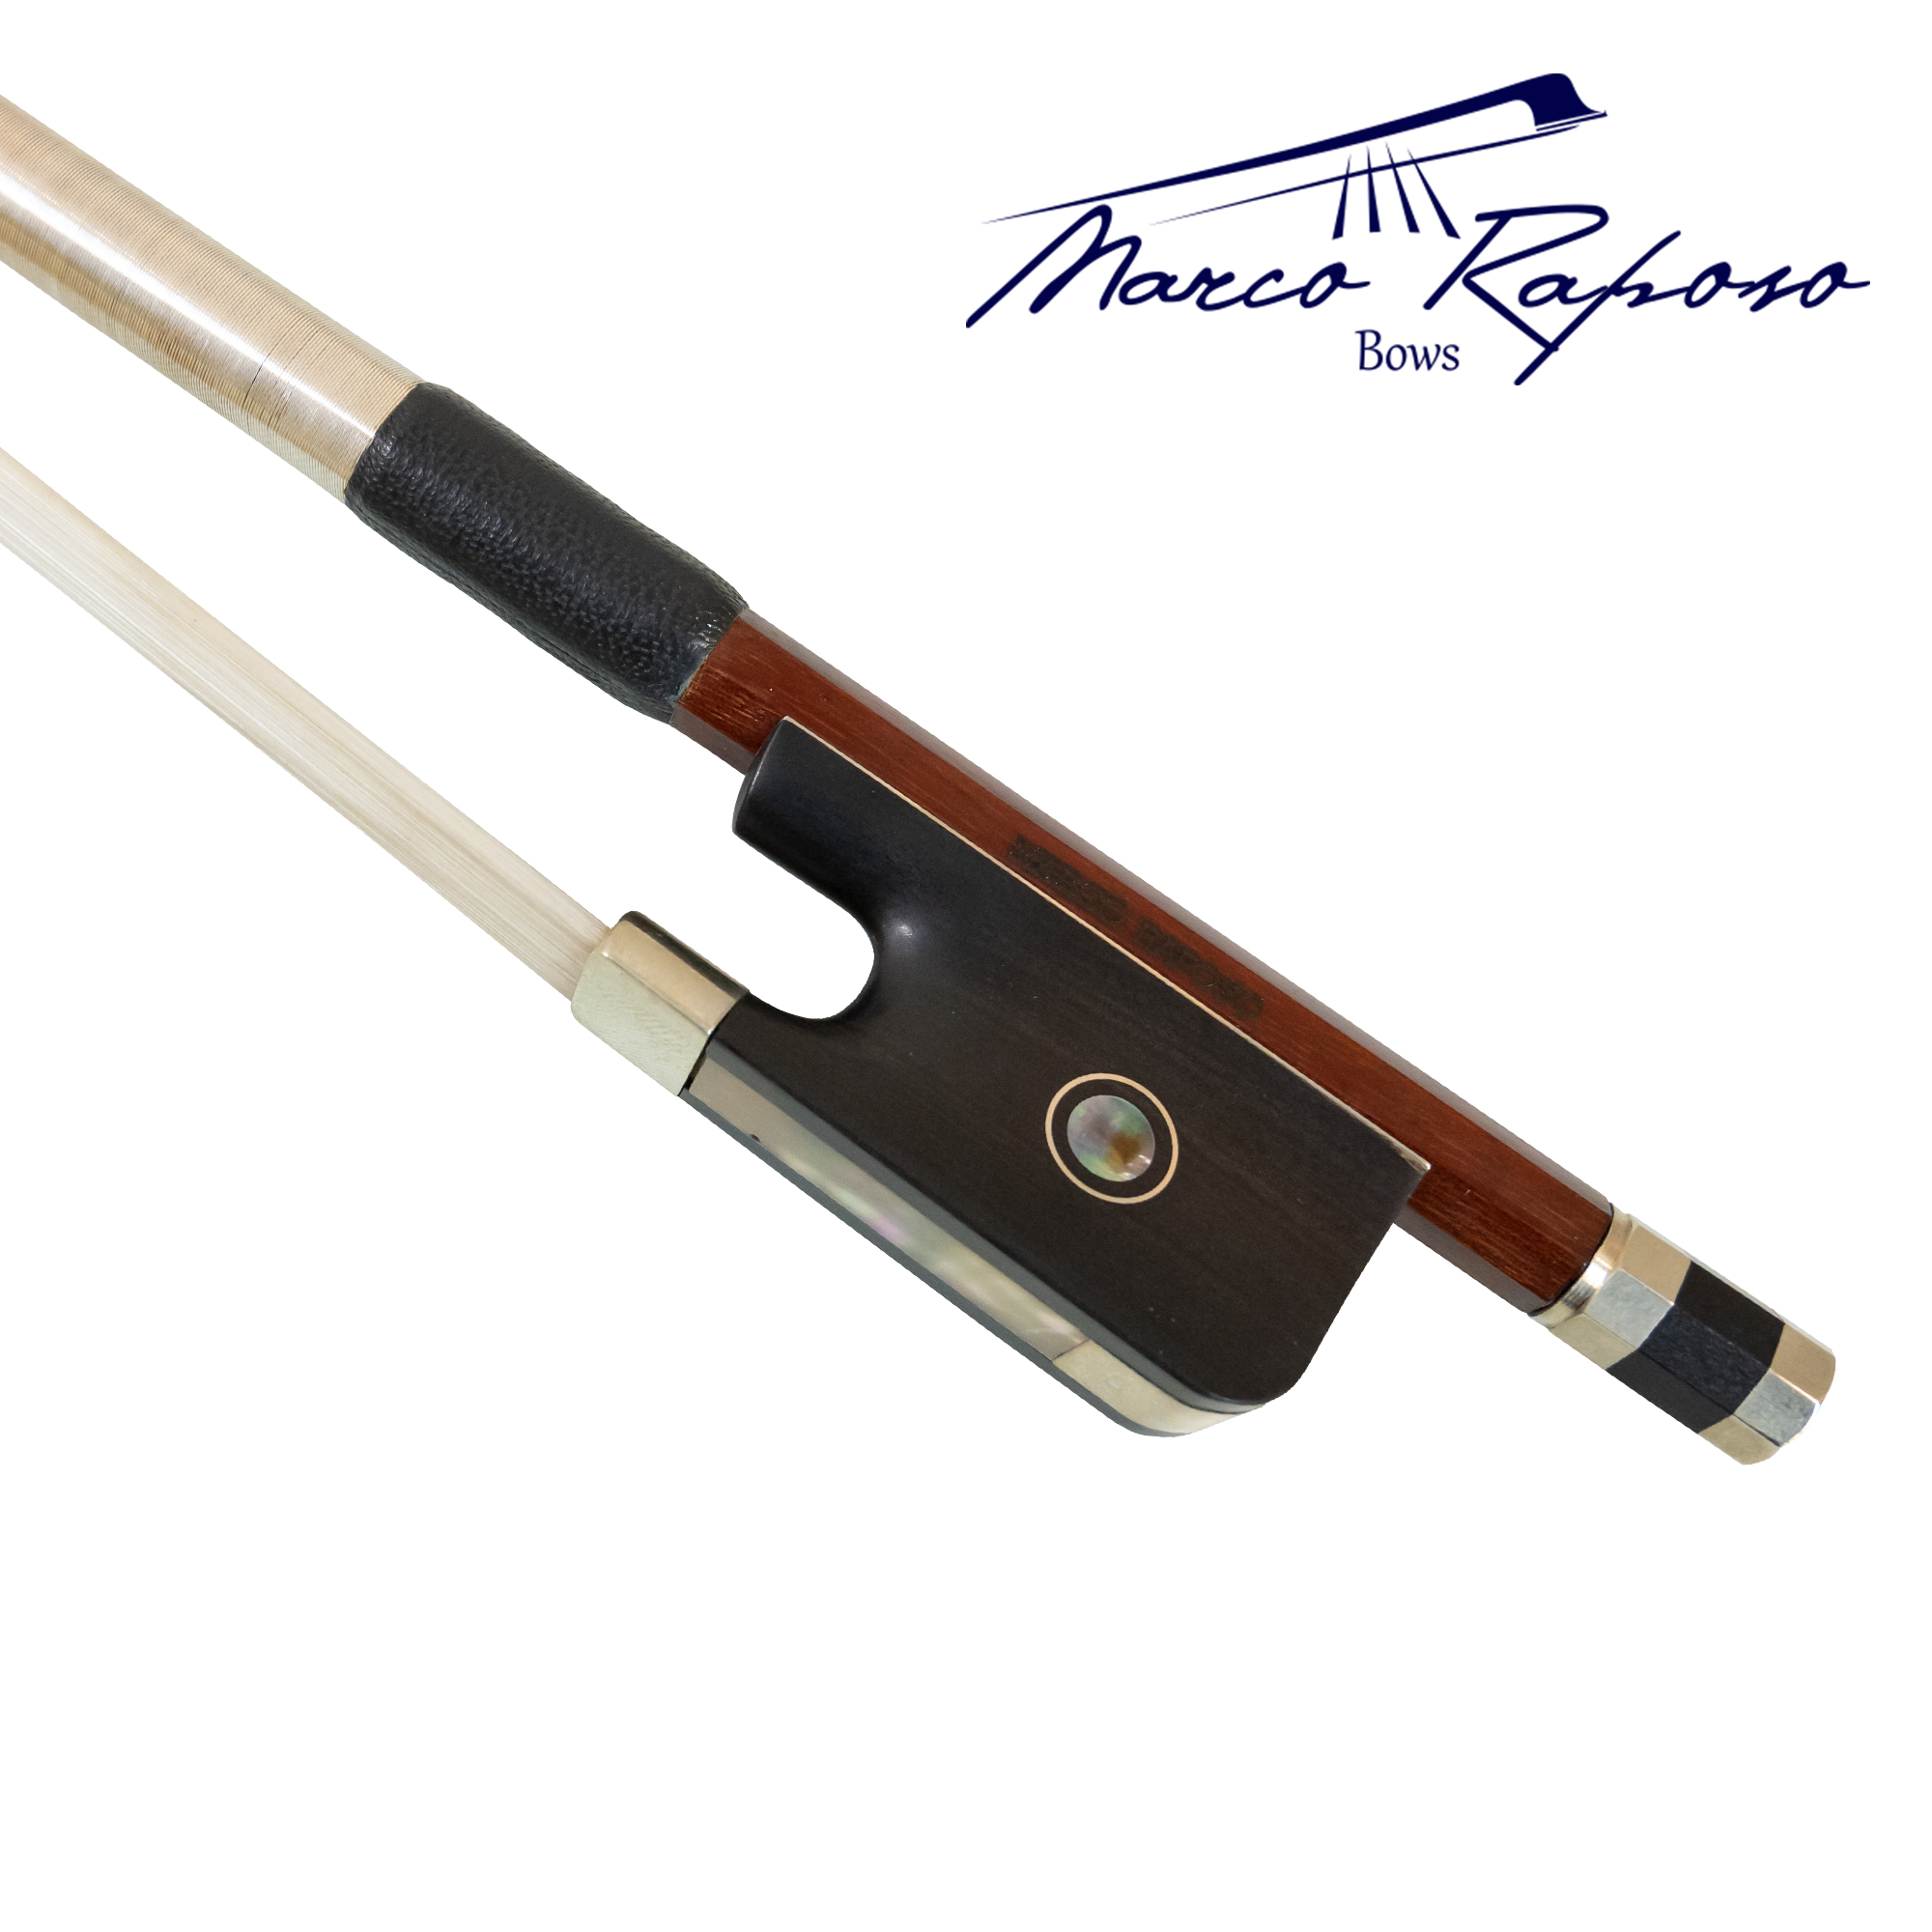 Marco Raposo Nickel Mounted Cello Bow in action